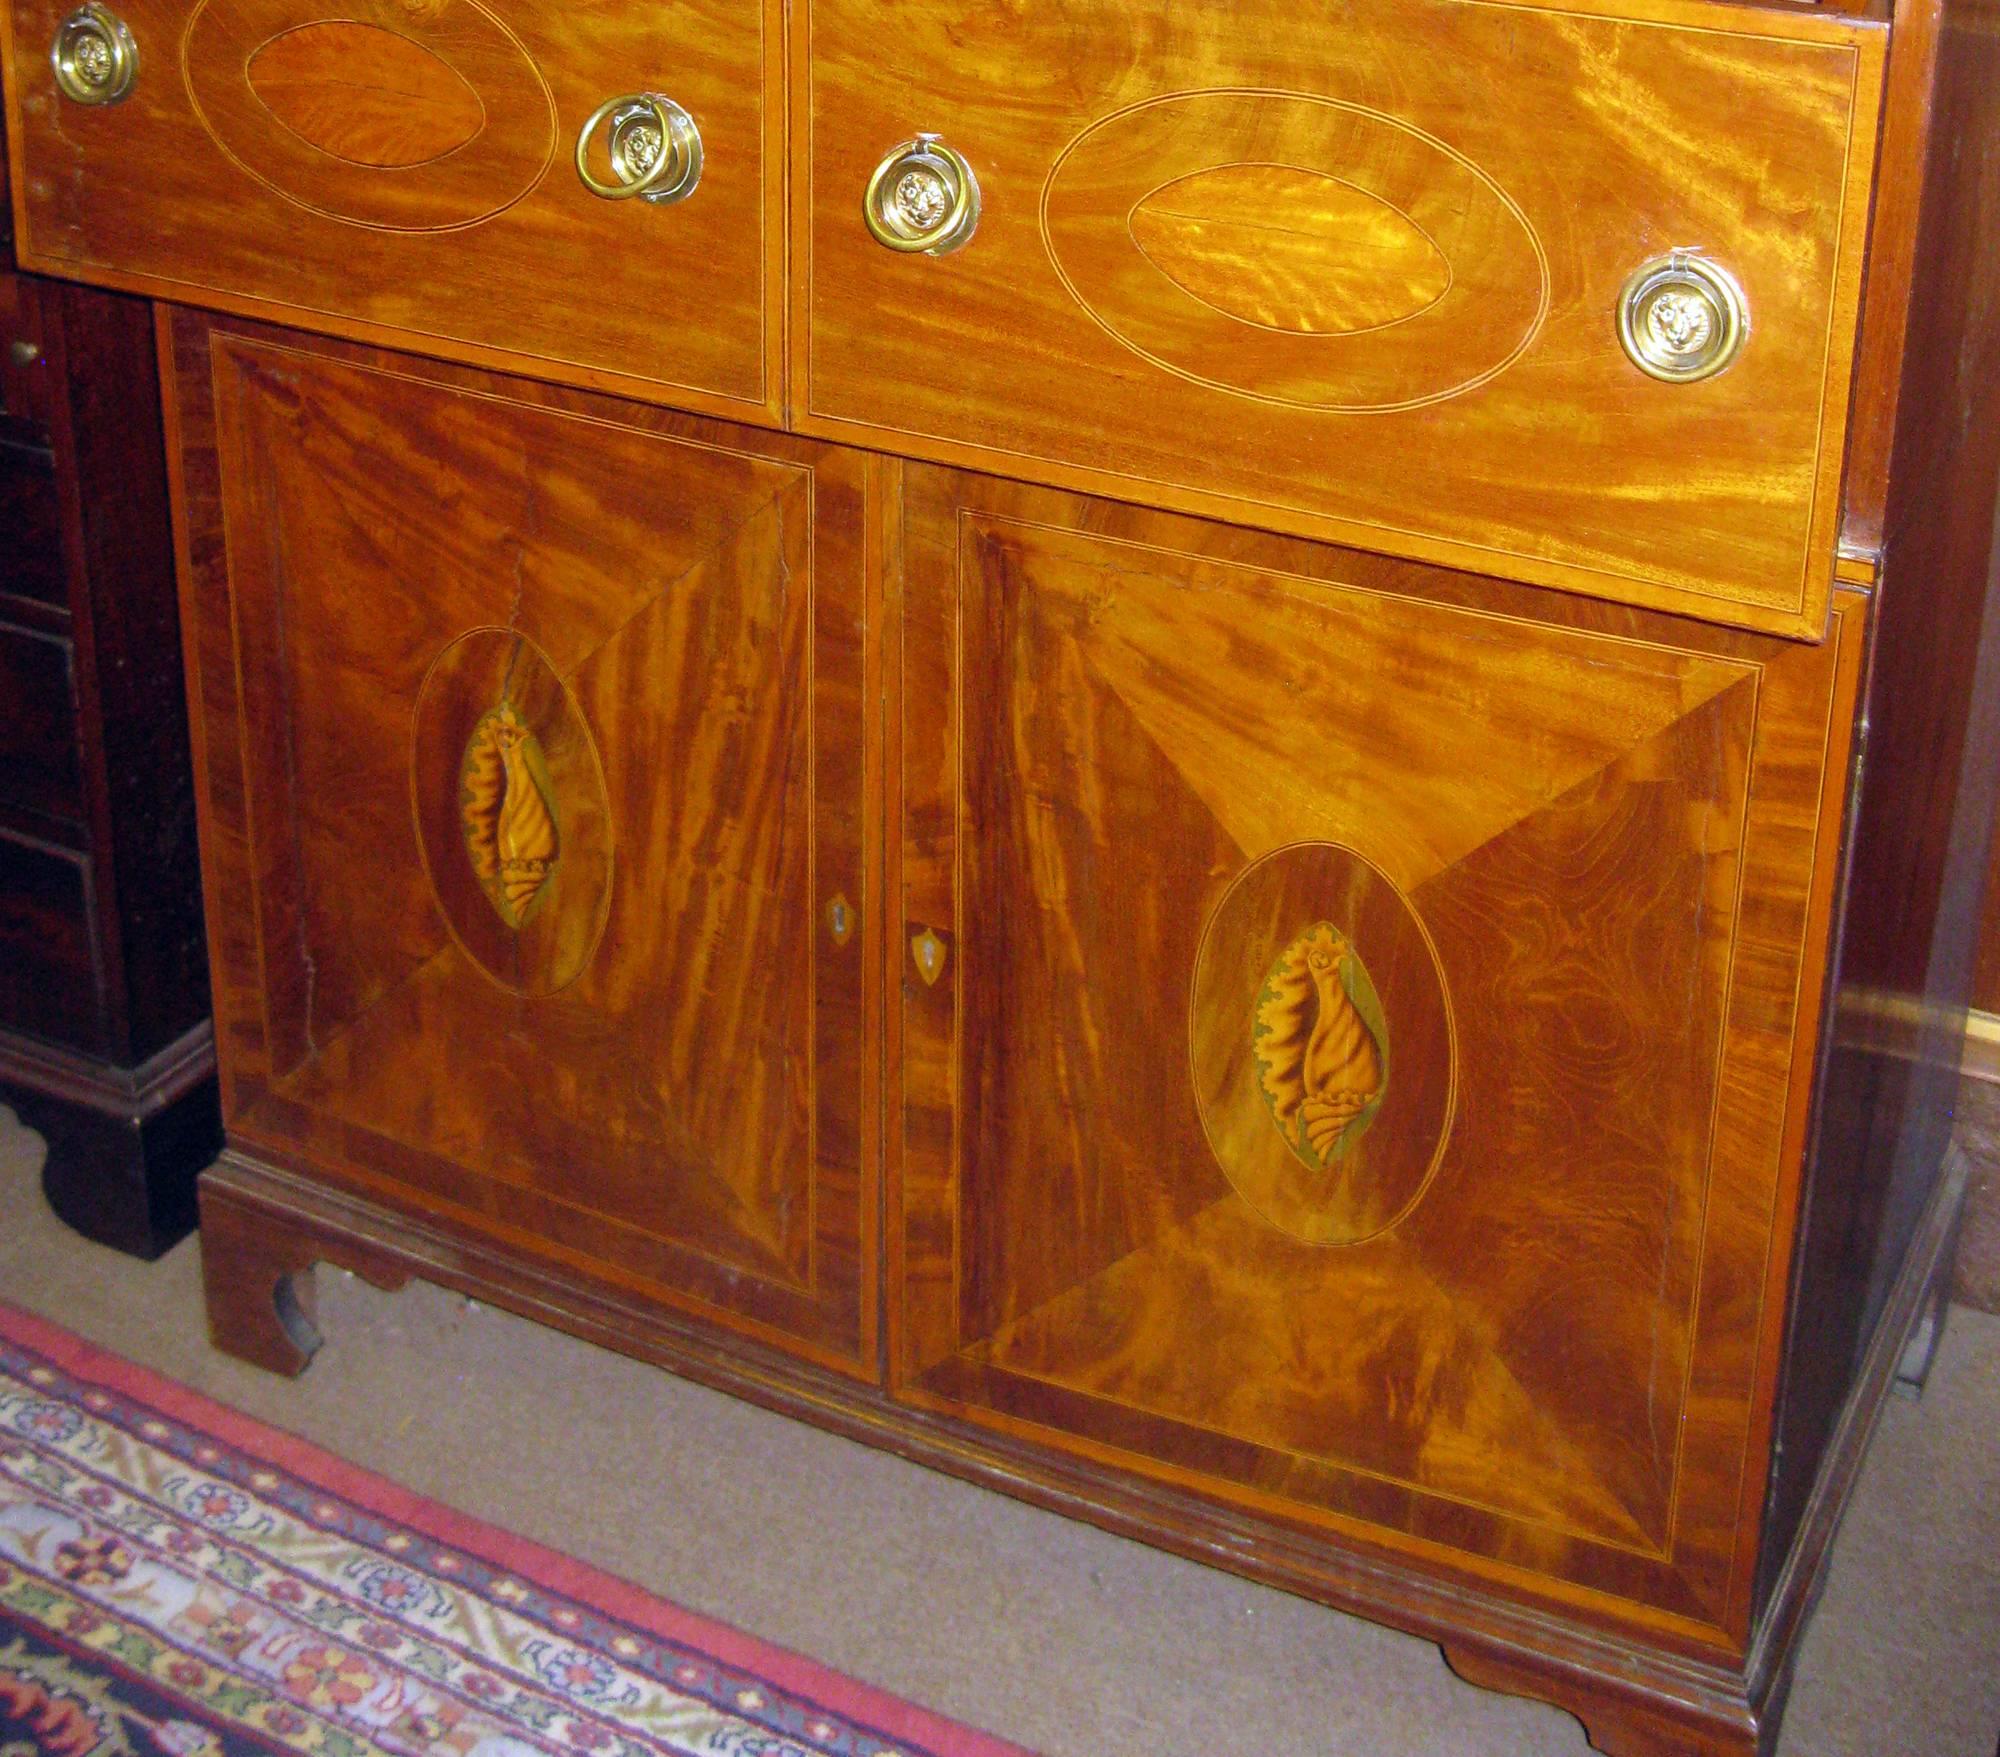 In a desirable light colored mahogany, this stately drop front butler's secretary features inlaid burled satinwood and fruit woods. The door veneers are quartered with a centre oval inlaid medallion and exquisitely done conch shell inlays on either